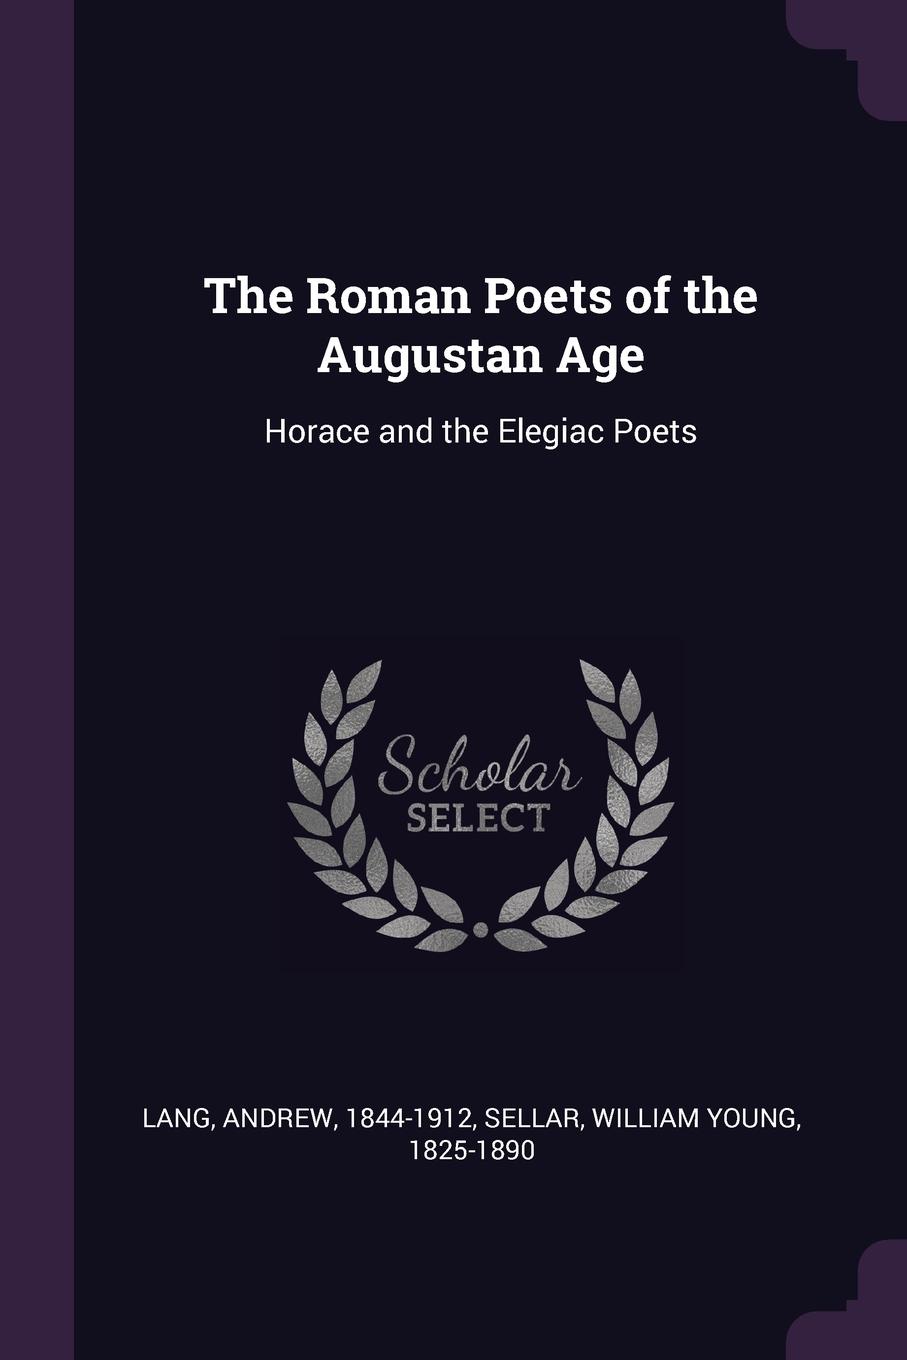 The Roman Poets of the Augustan Age. Horace and the Elegiac Poets